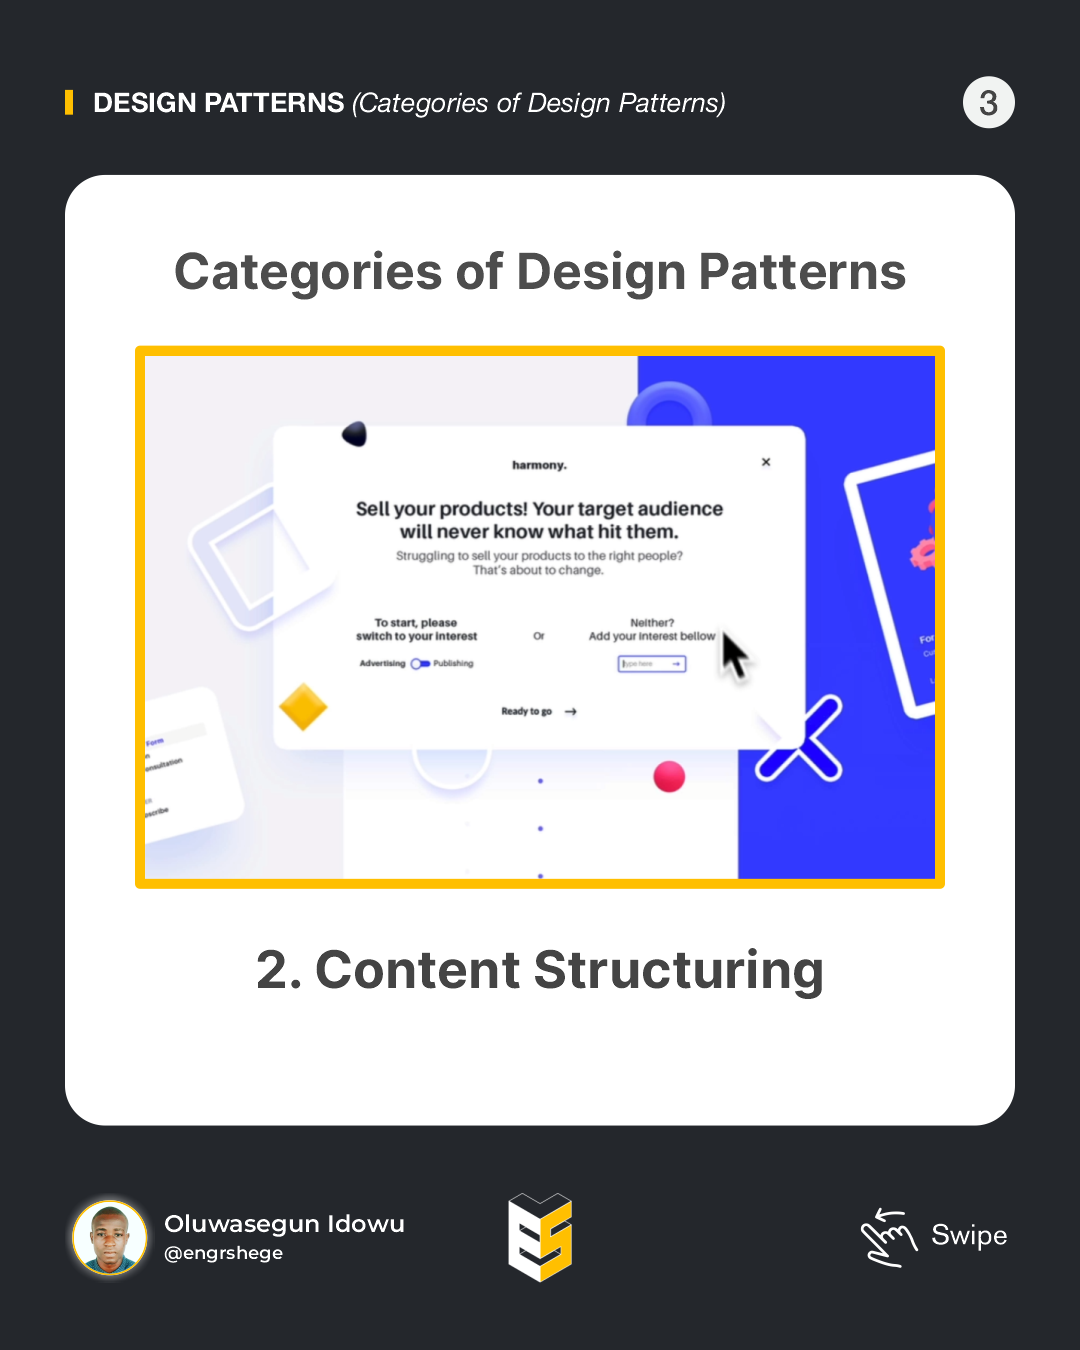 Categories of Design Patterns - 2. Content Structuring